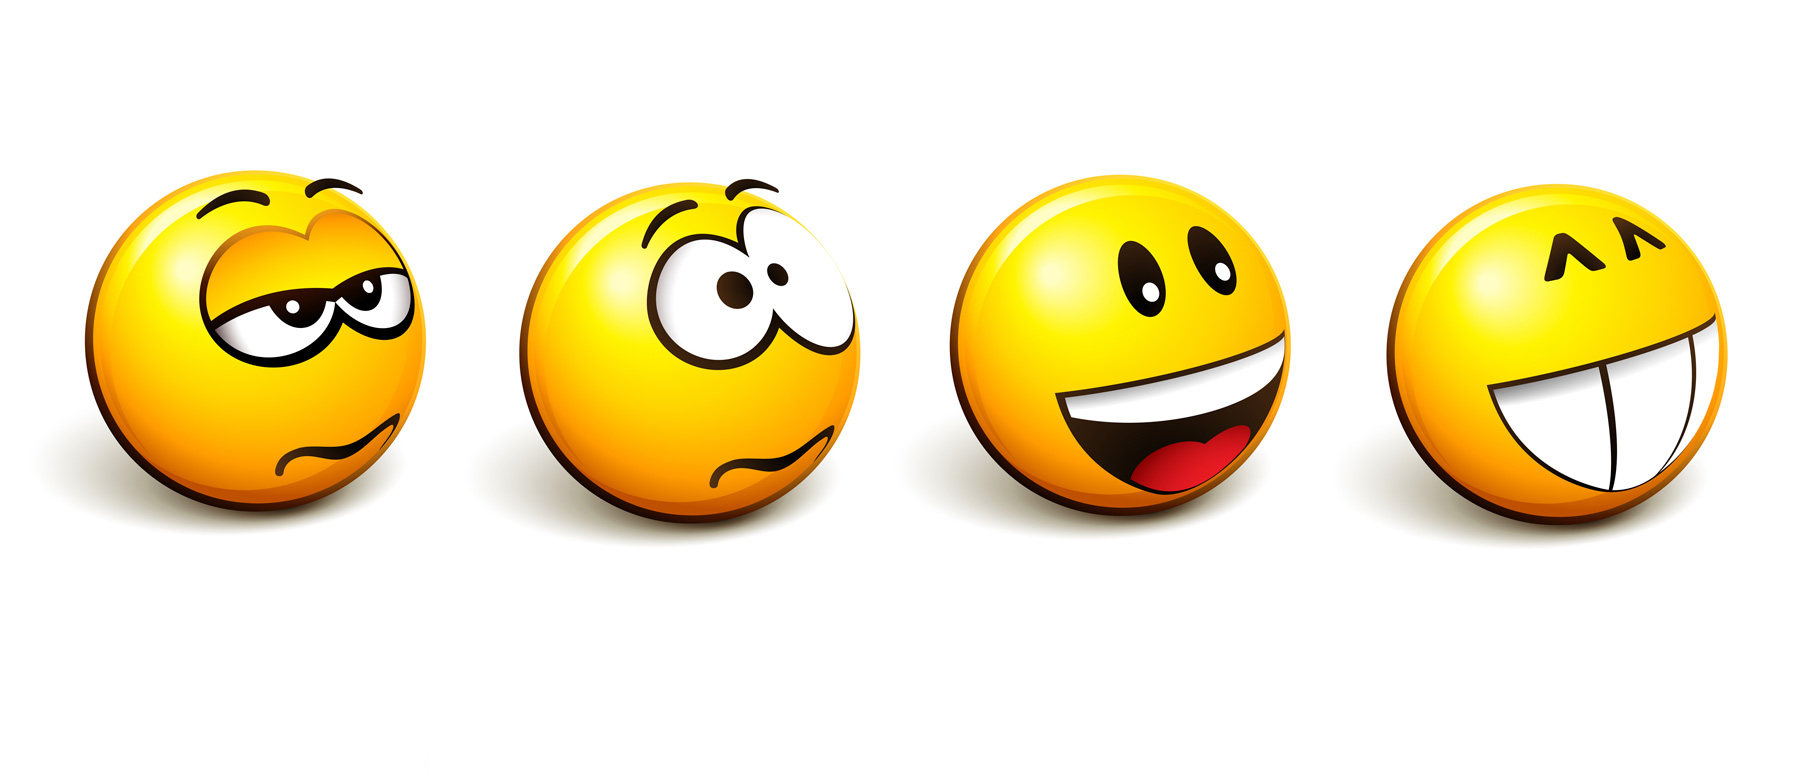 1000+ images about Emoticons | Smiley faces, Follow ...